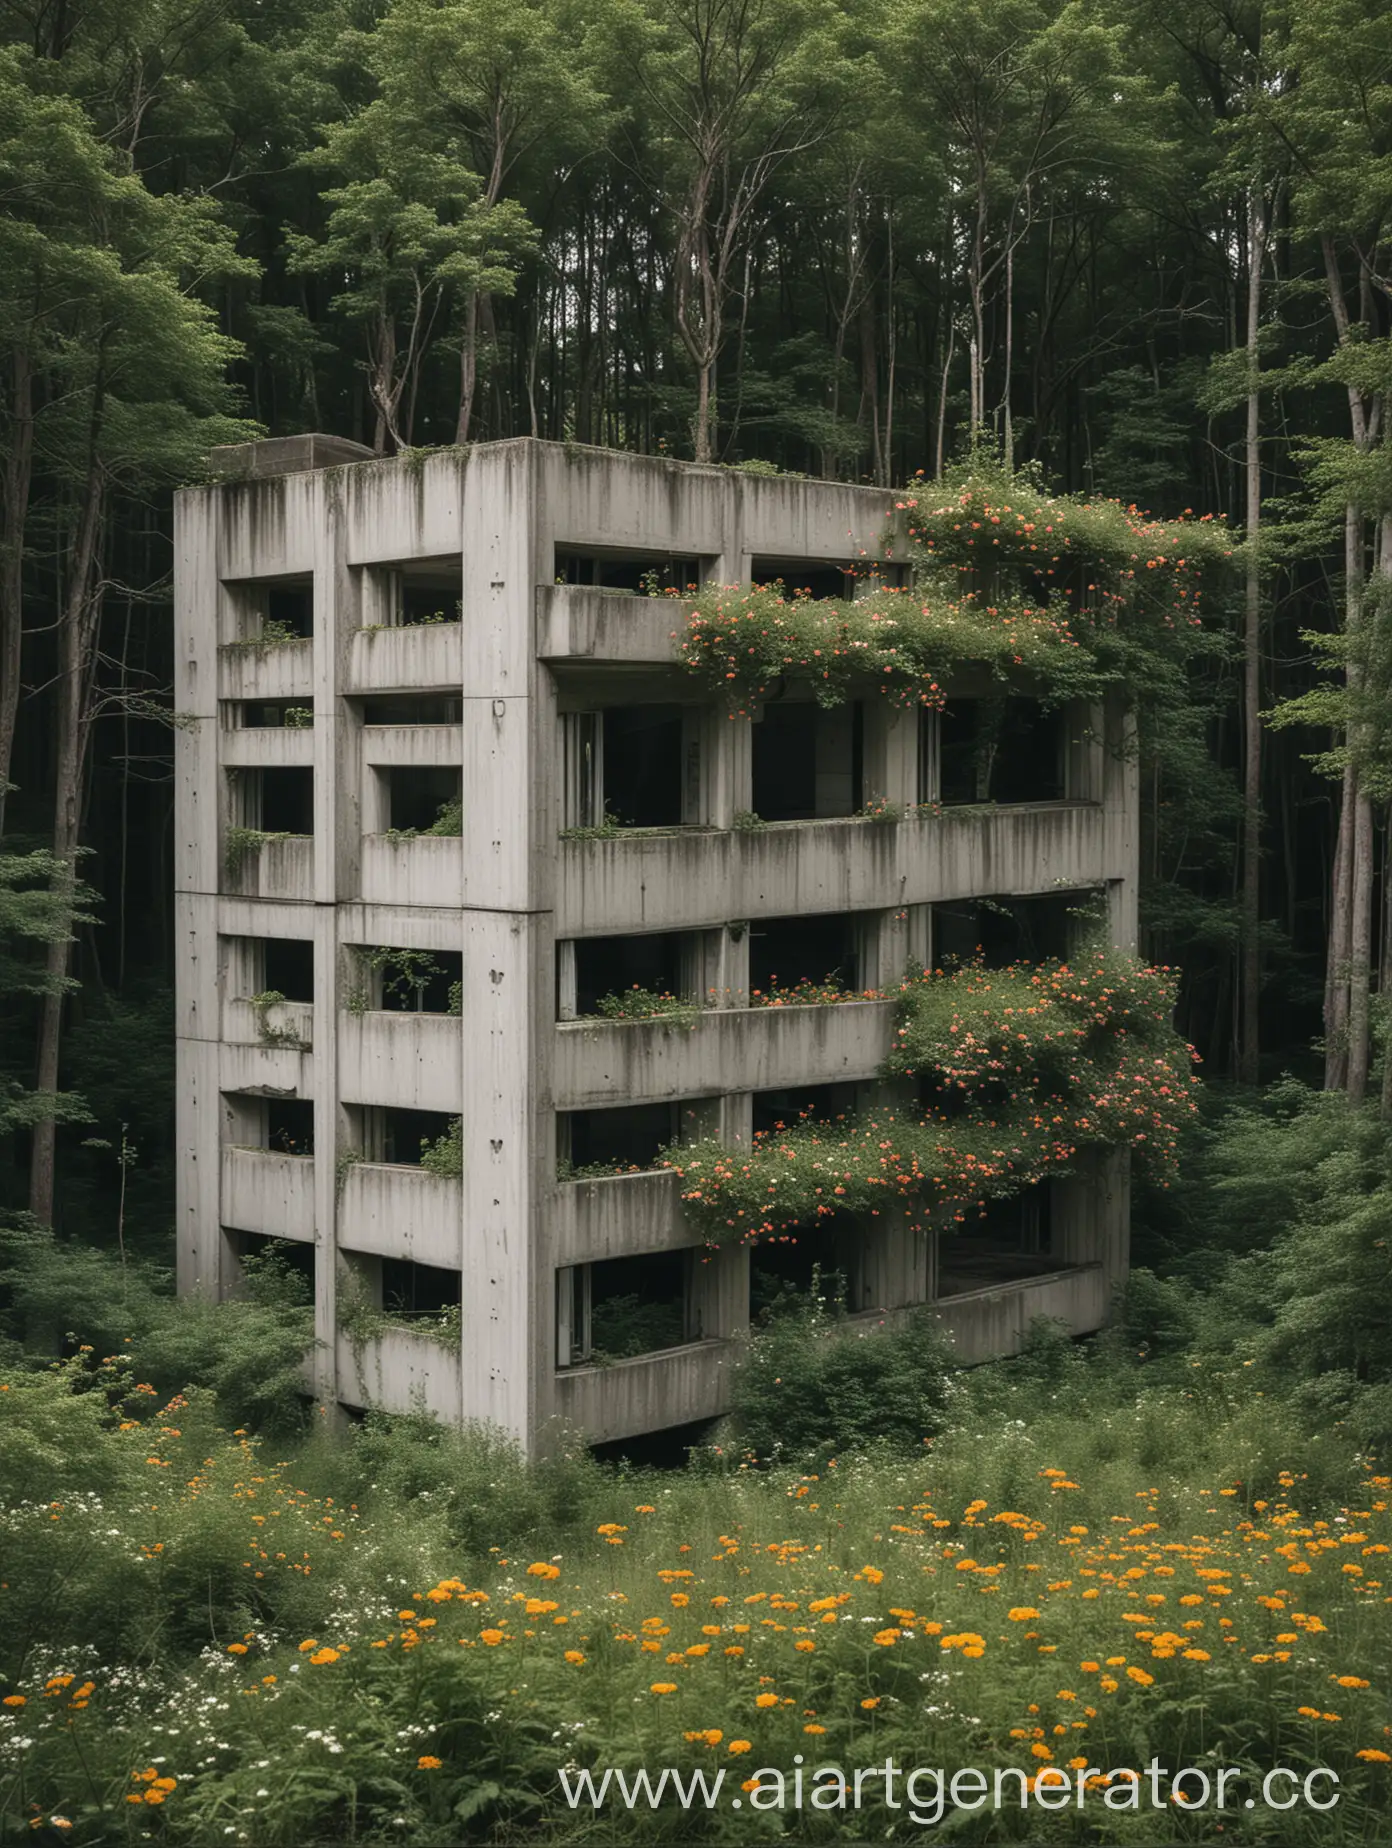 Abandoned-Concrete-Building-Surrounded-by-Blooming-Forest